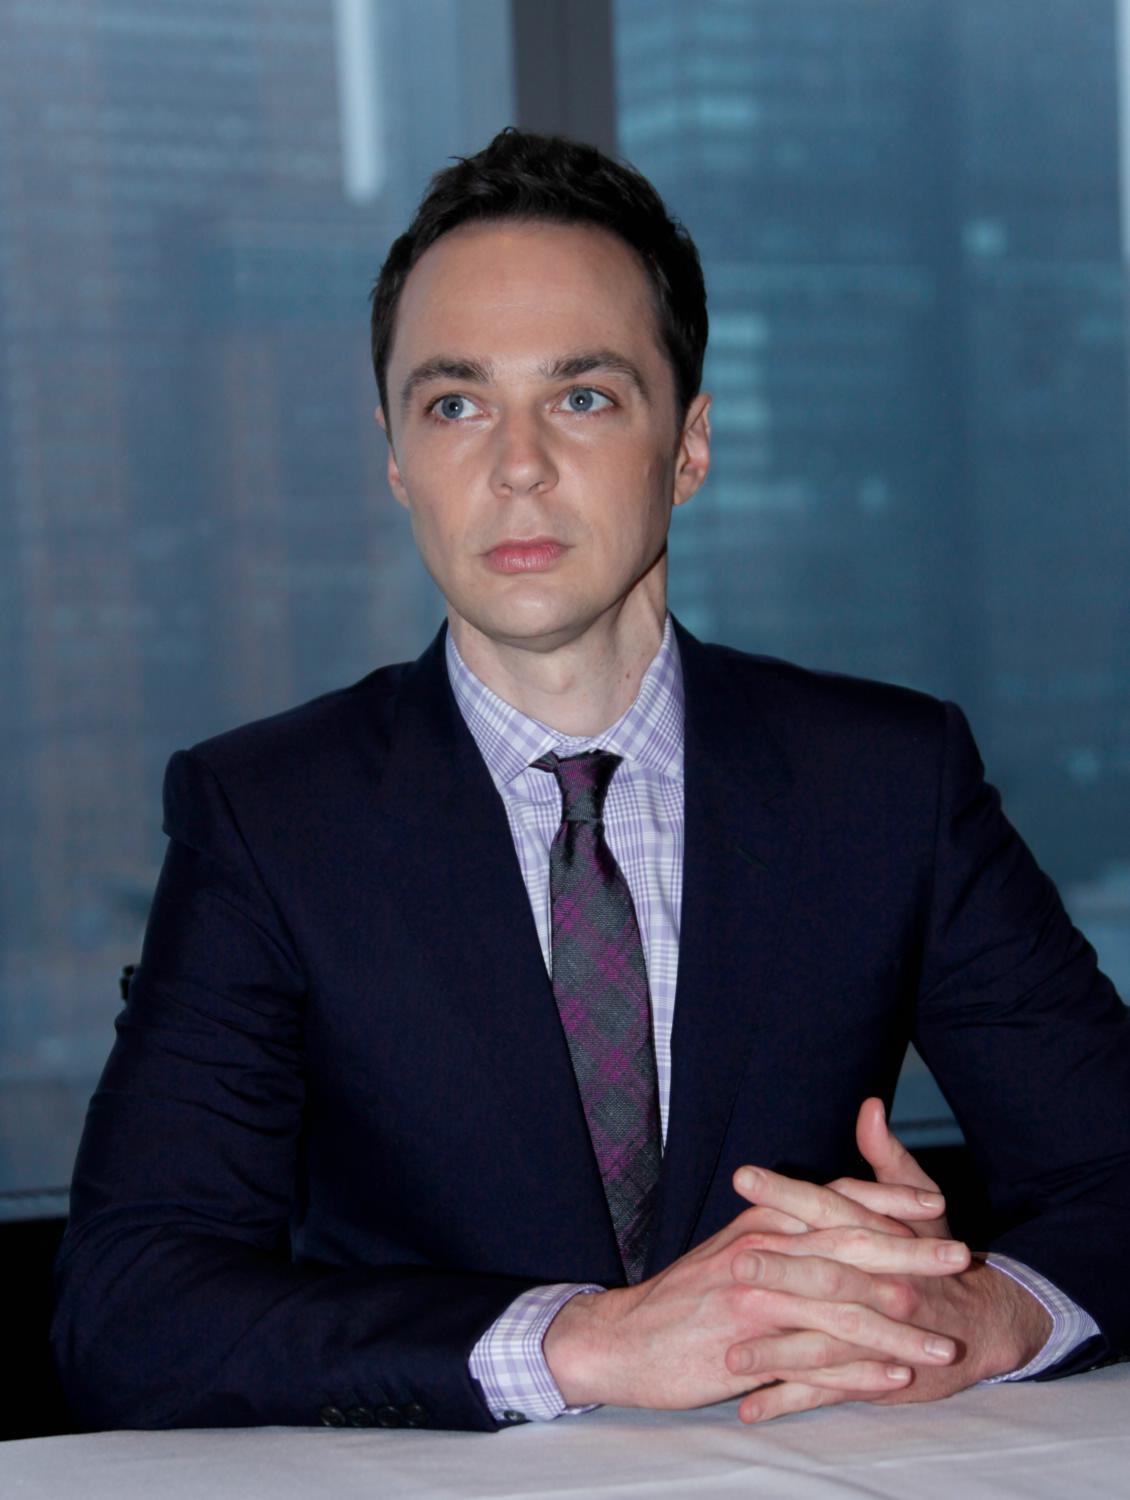 Jim Parsons at Home Press Conference